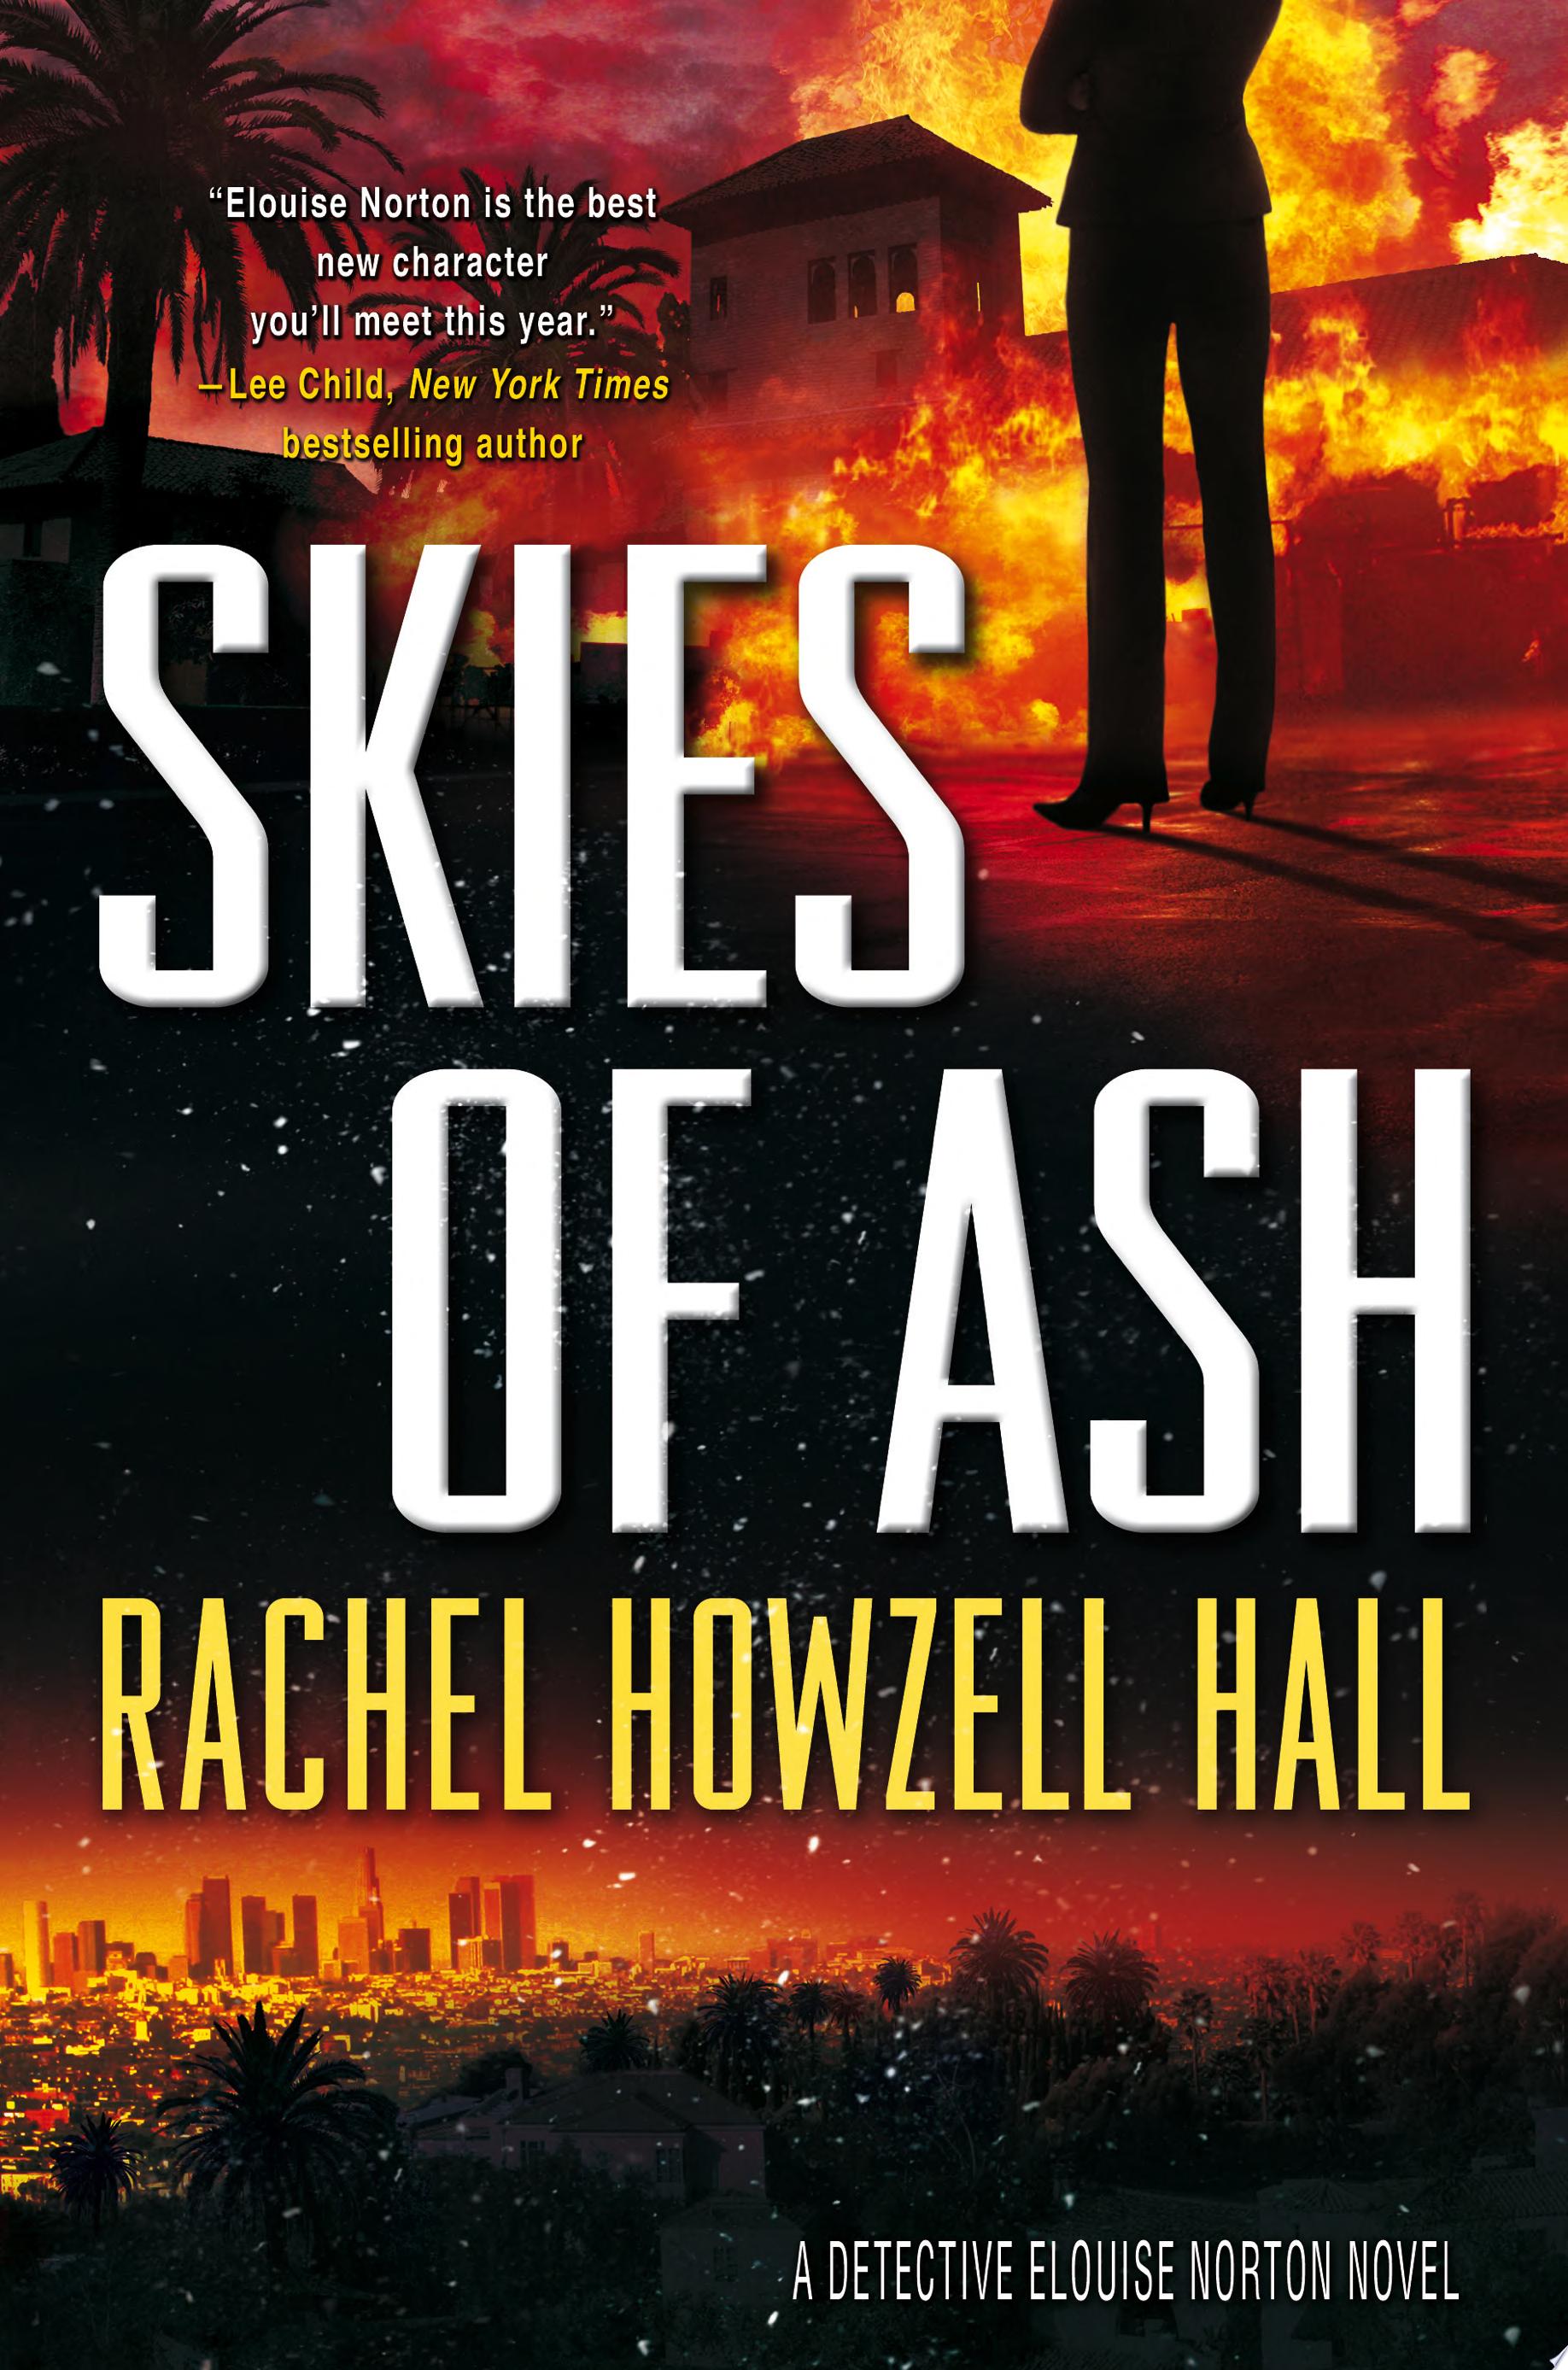 Image for "Skies of Ash"